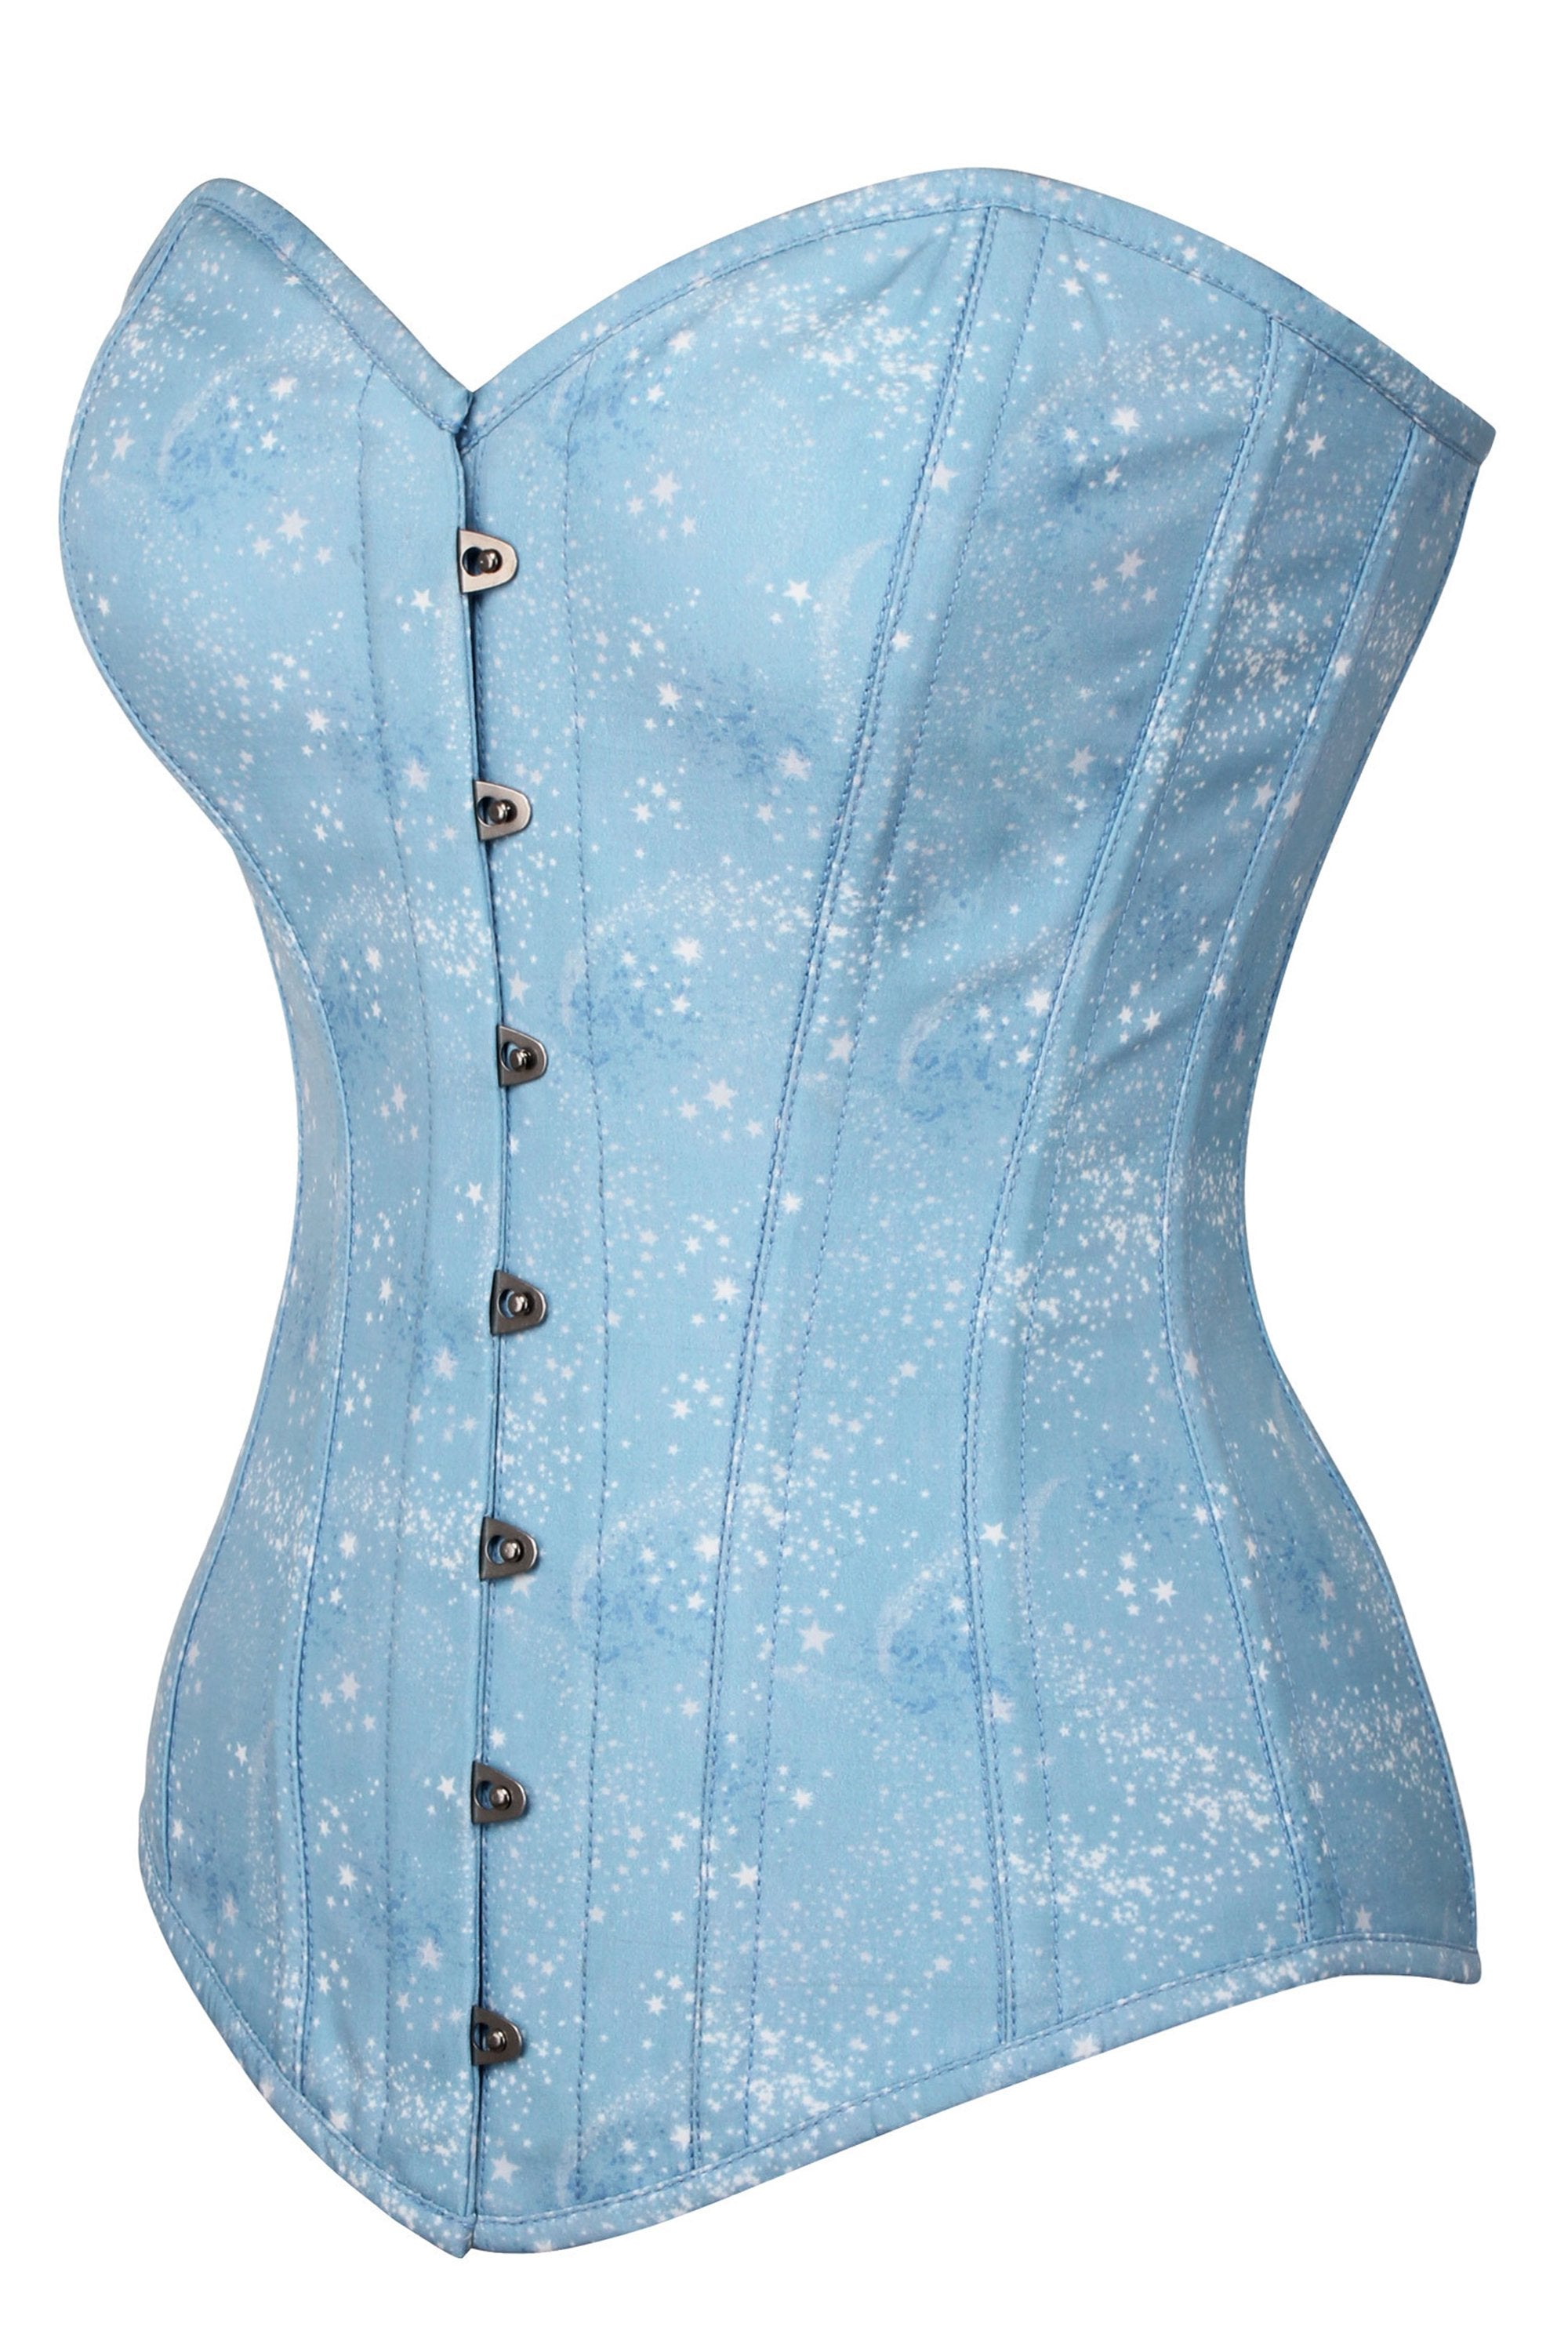 Hyper Real Lace and Vinyl Bustier in Blue